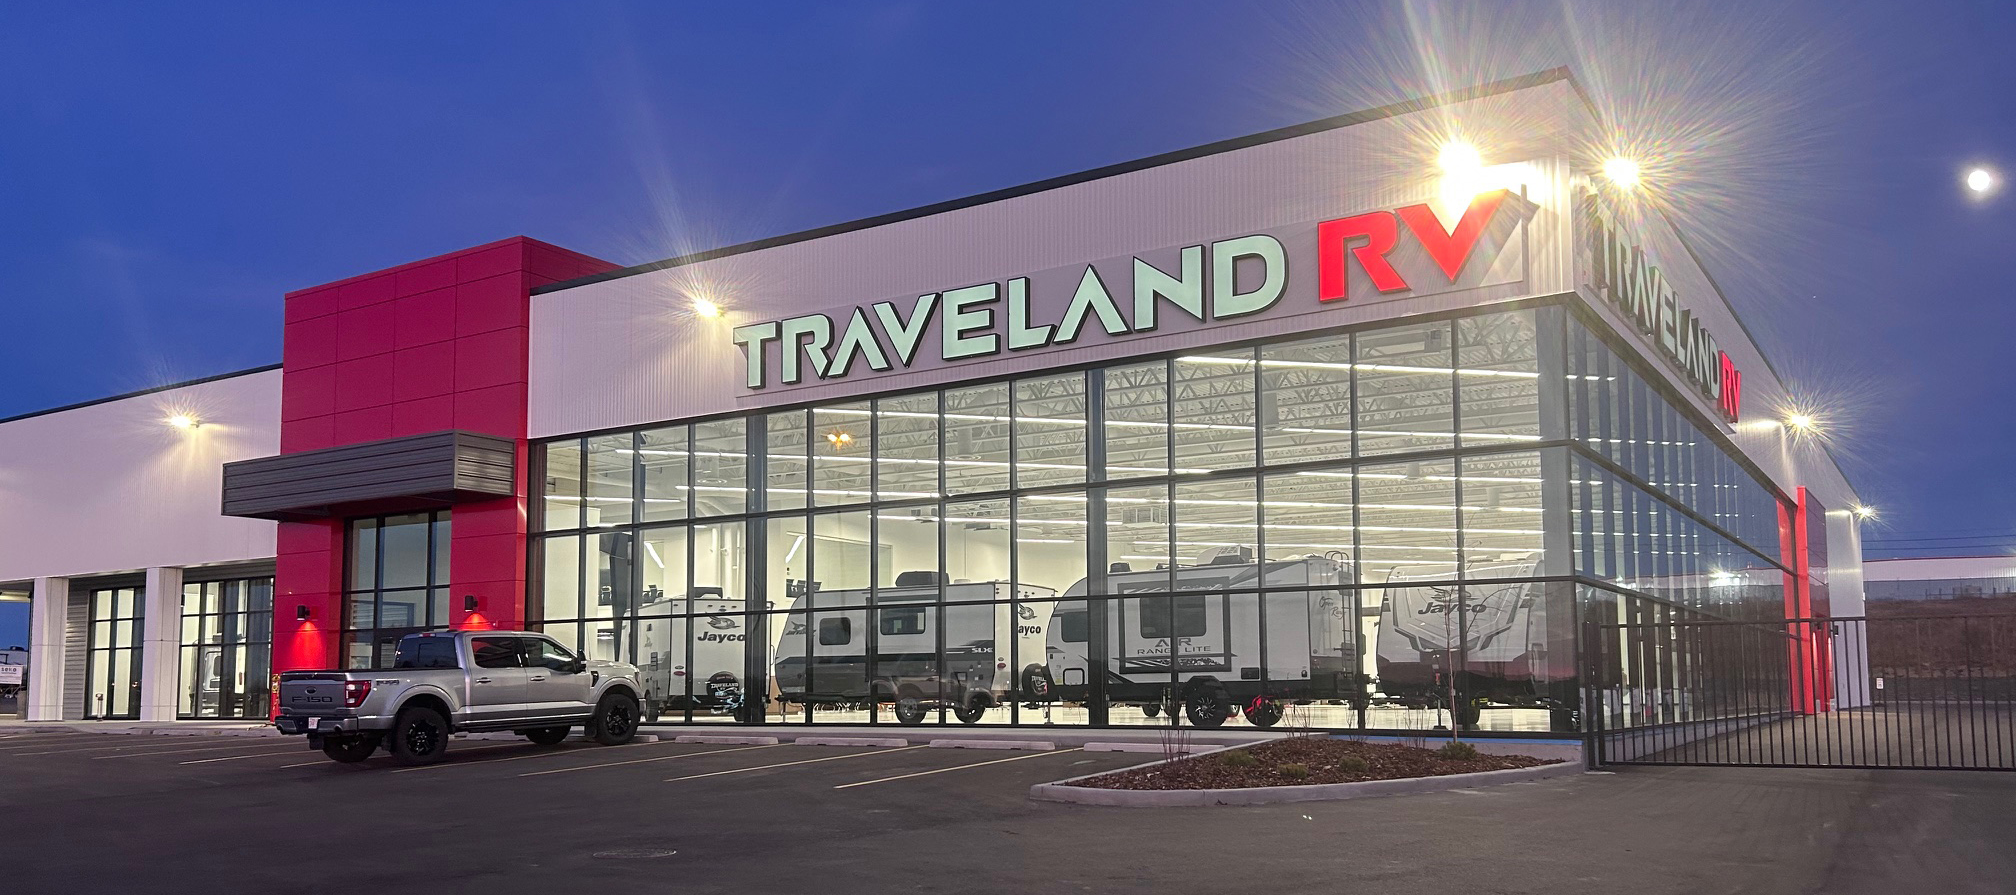 Traveland RV - Airdrie Location: 63 Kingsview Rd SE, Airdrie, AB T4A 0A8